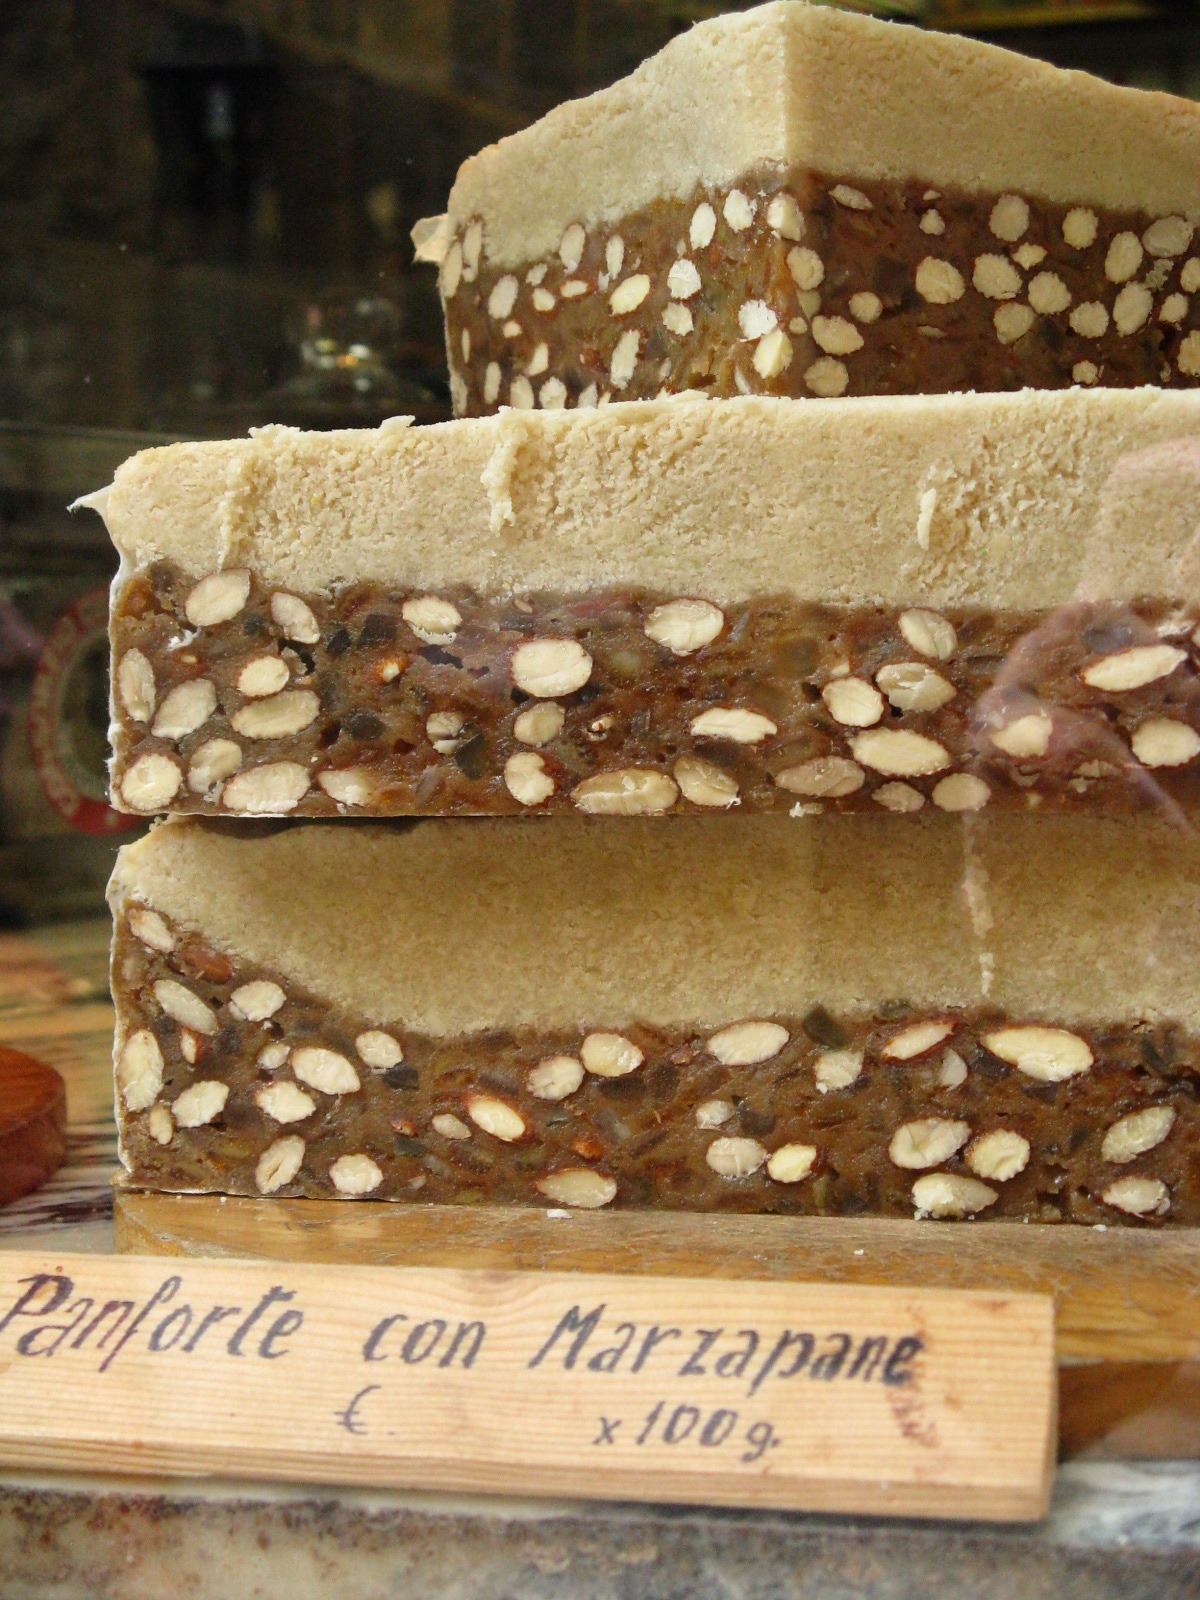 A variation of panforte with a topping of marzipan at a shop in San Gimignano